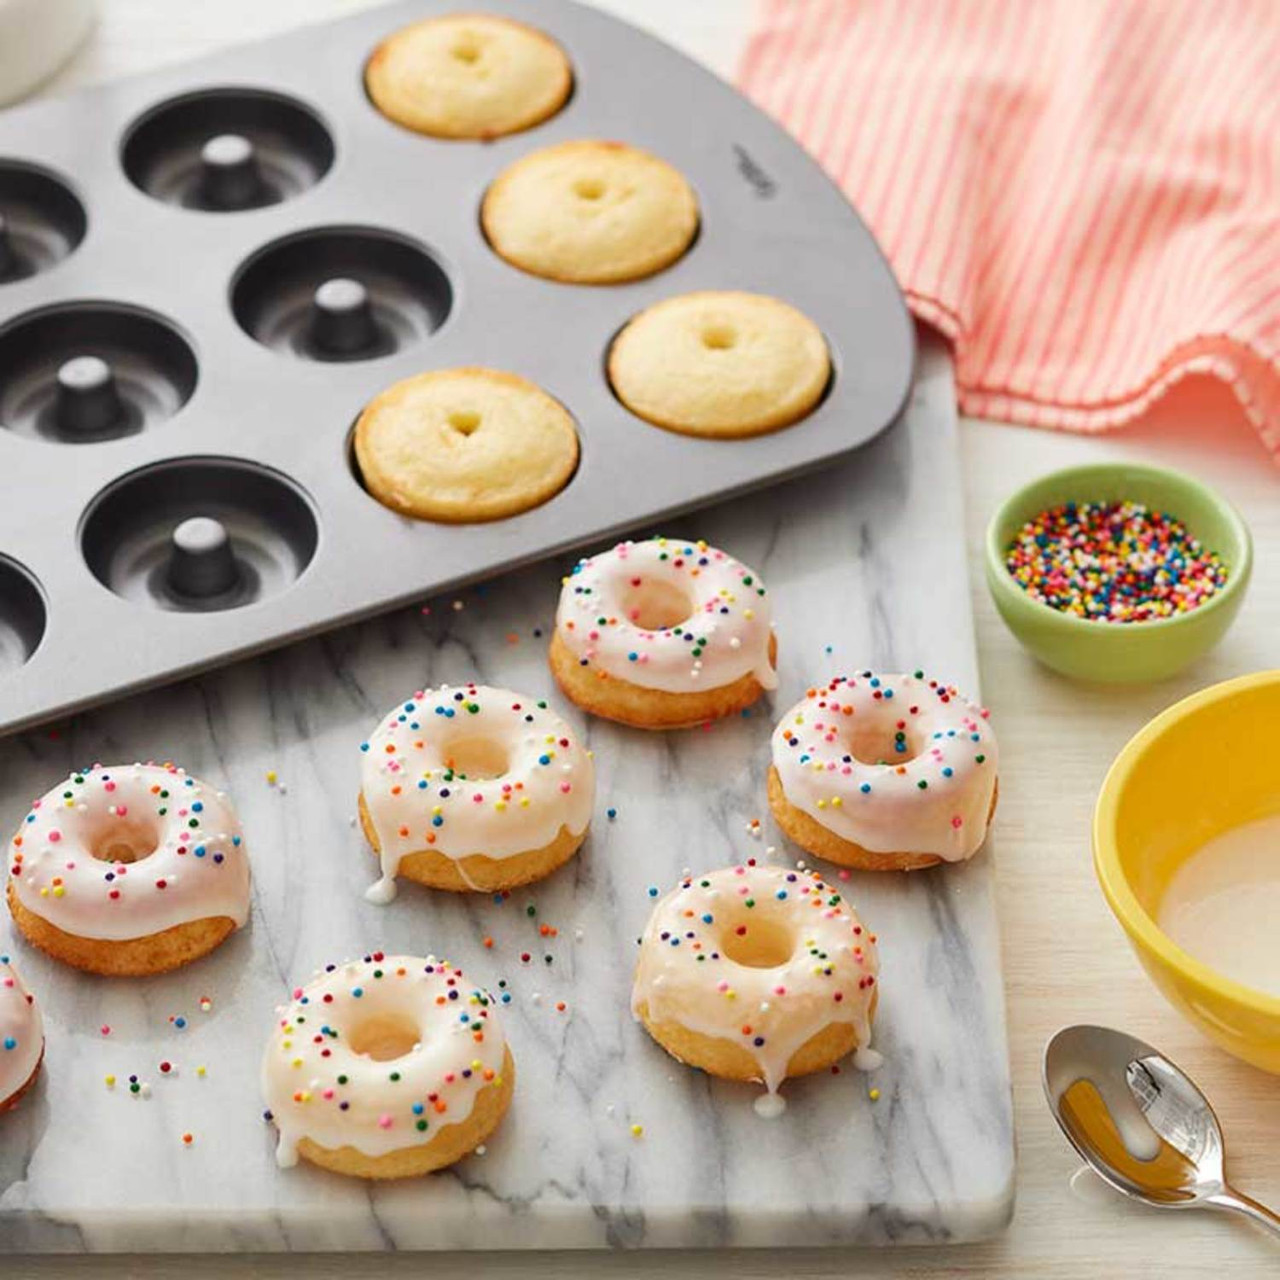 Silicone Donut Mold Non-Stick Doughnut Pastry Molds Baking Pan Chocolate  Cake Dessert DIY Biscuit Bagels Muffins Donuts Maker 1X